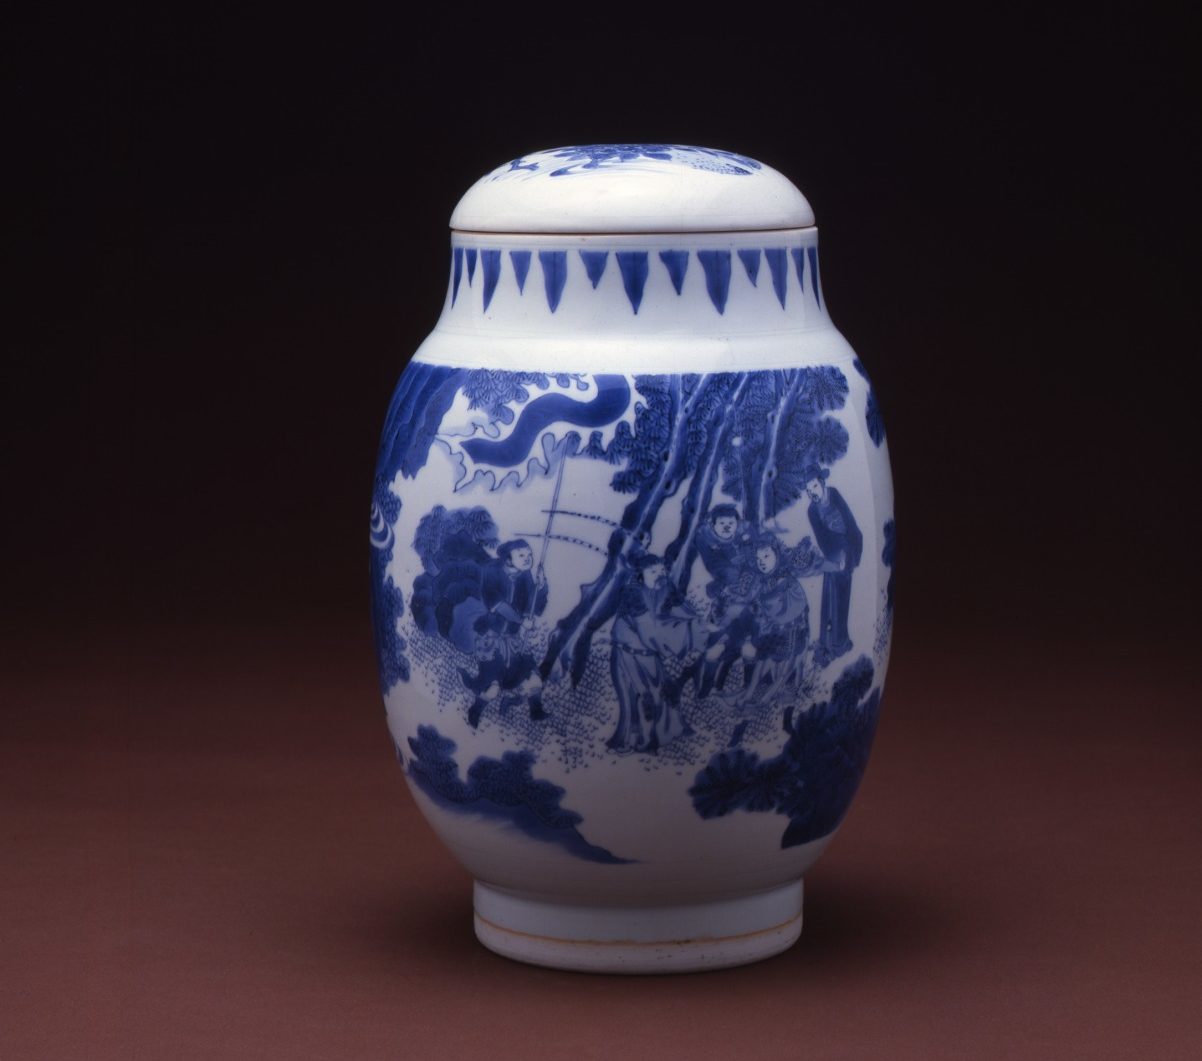 Unknown, Covered jar, Transitional period. porcelain with blue underglaze. Gift of Dr. and Mrs. Matthew L. Wong.